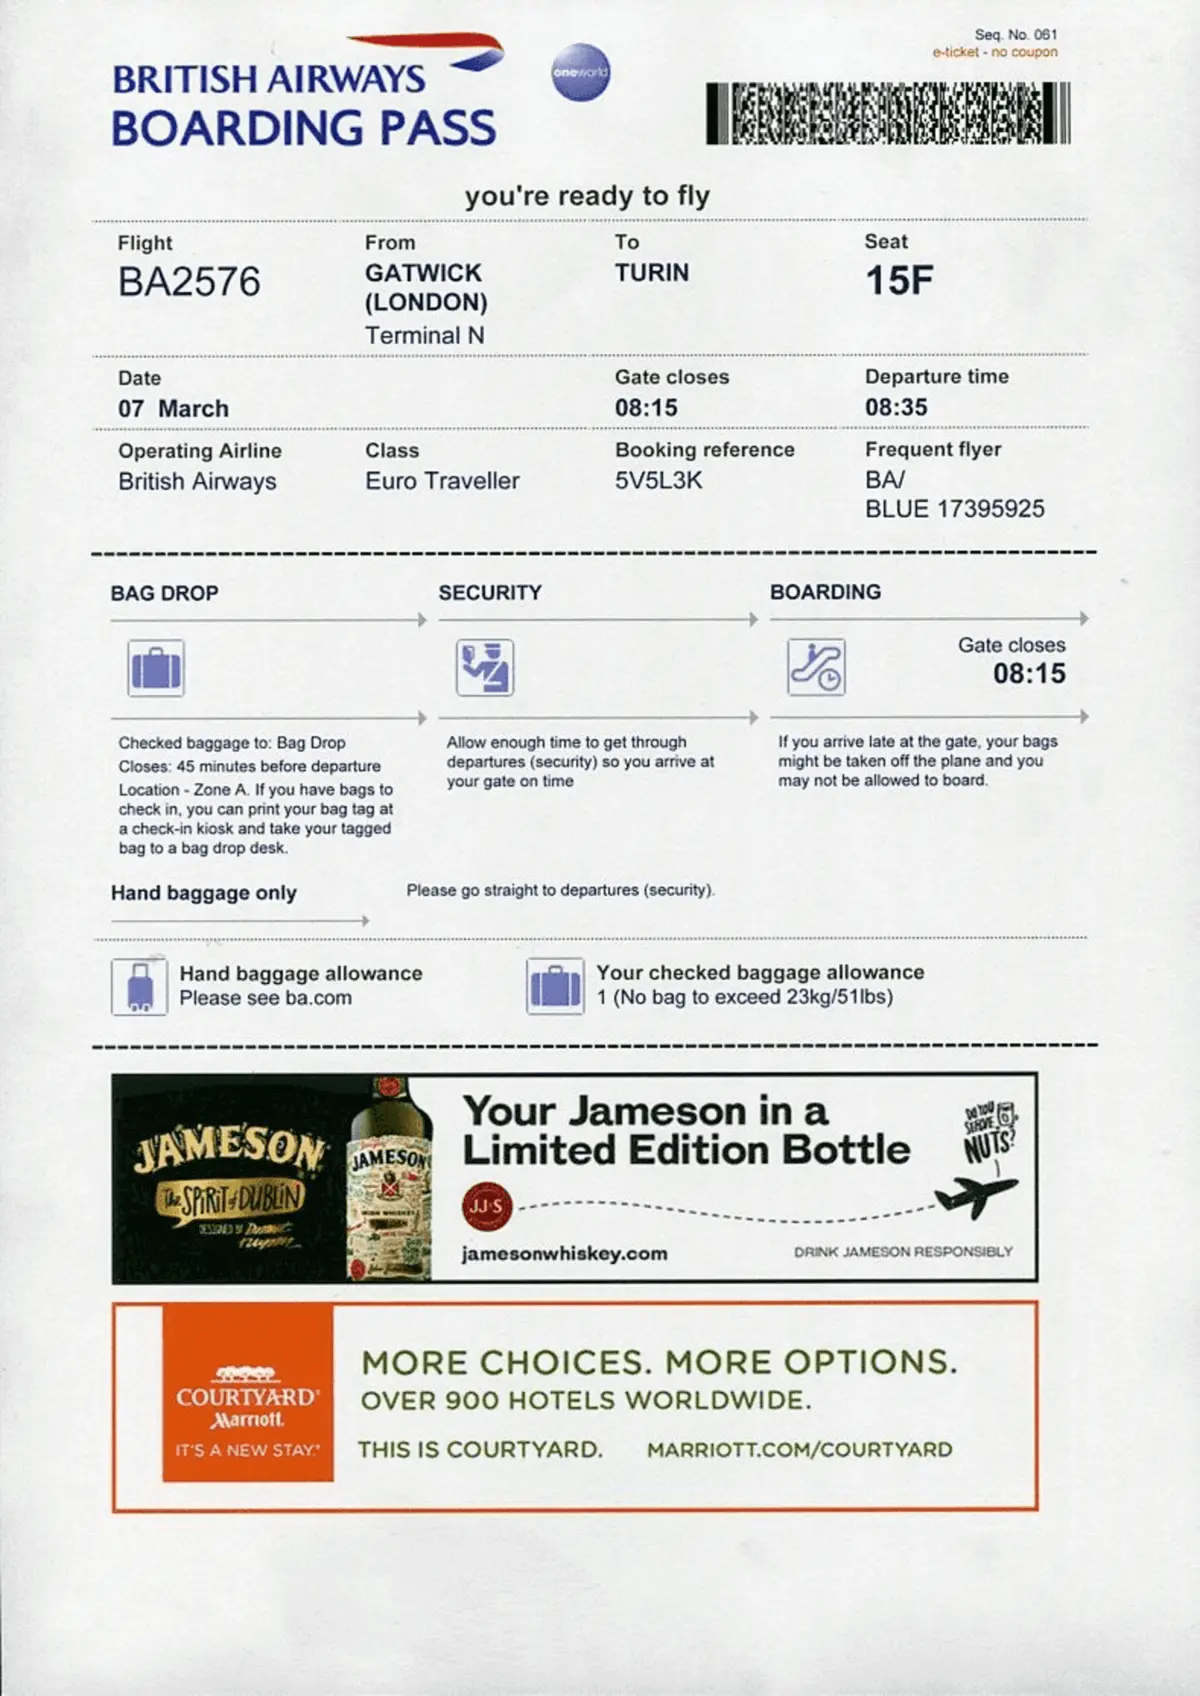 Orlando Airport Mco Advertising Boarding Passes A1